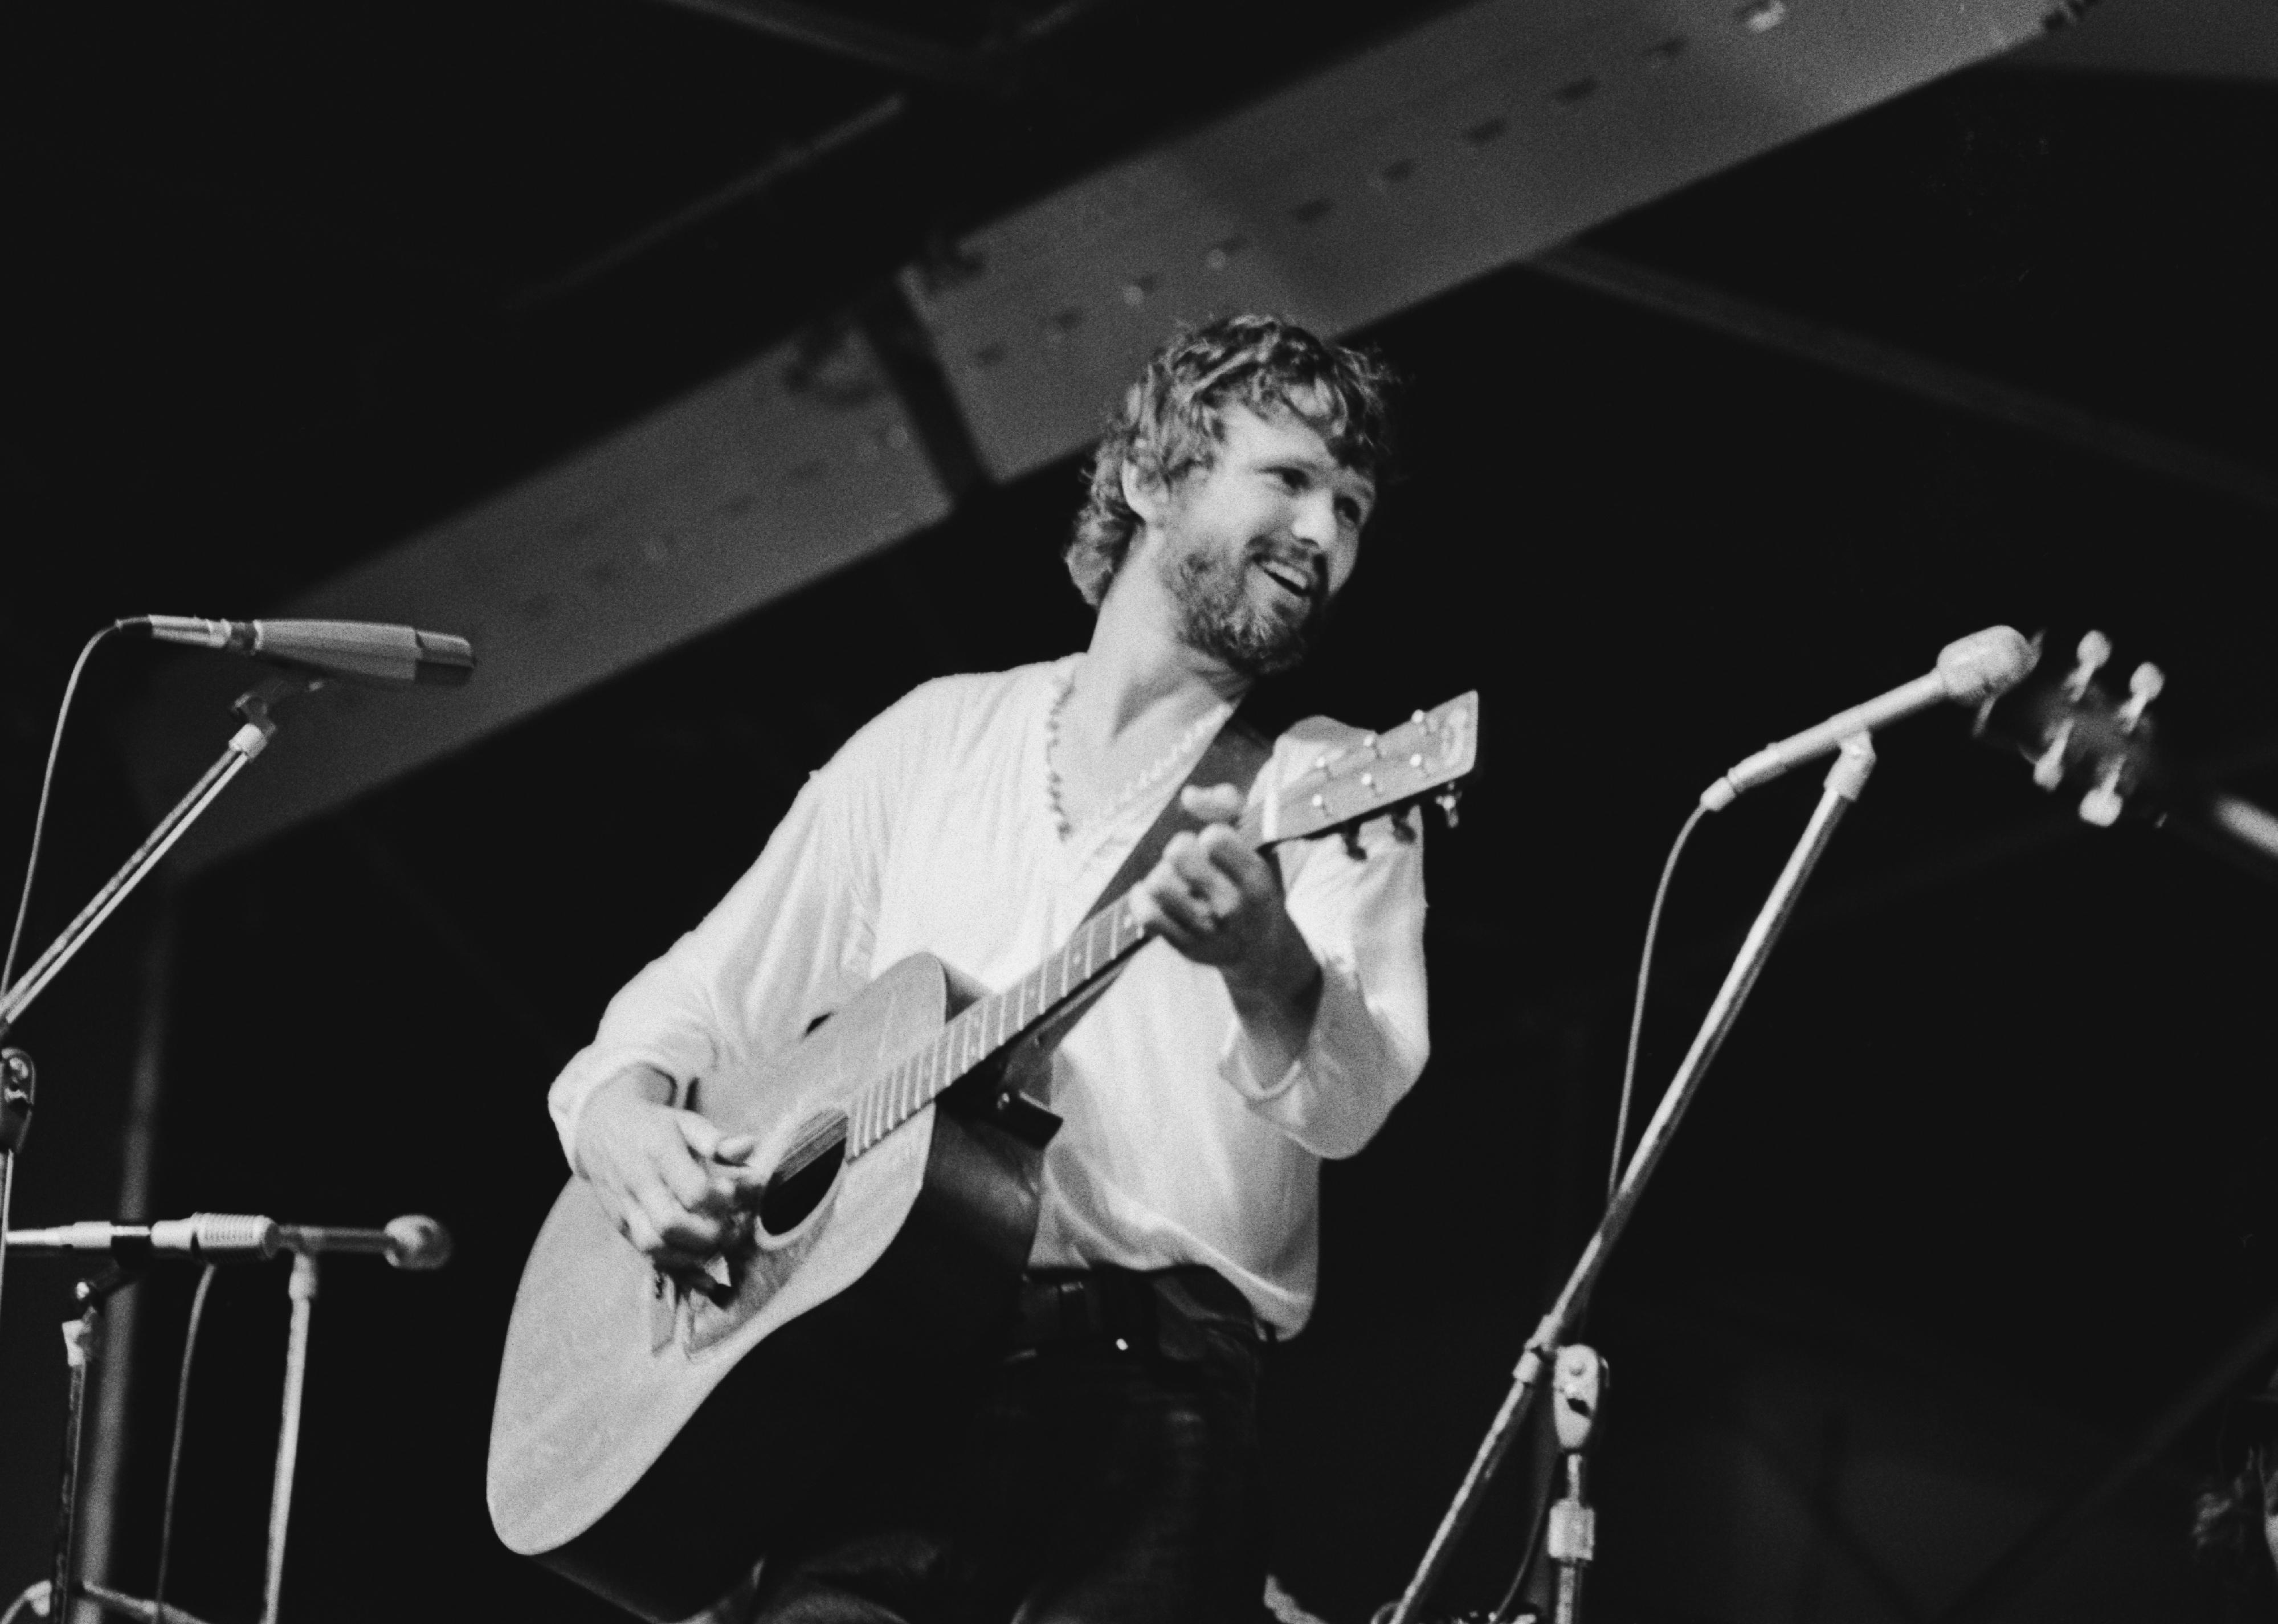 Kris Kristofferson, wearing a white v-neck top, playing an acoustic guitar.